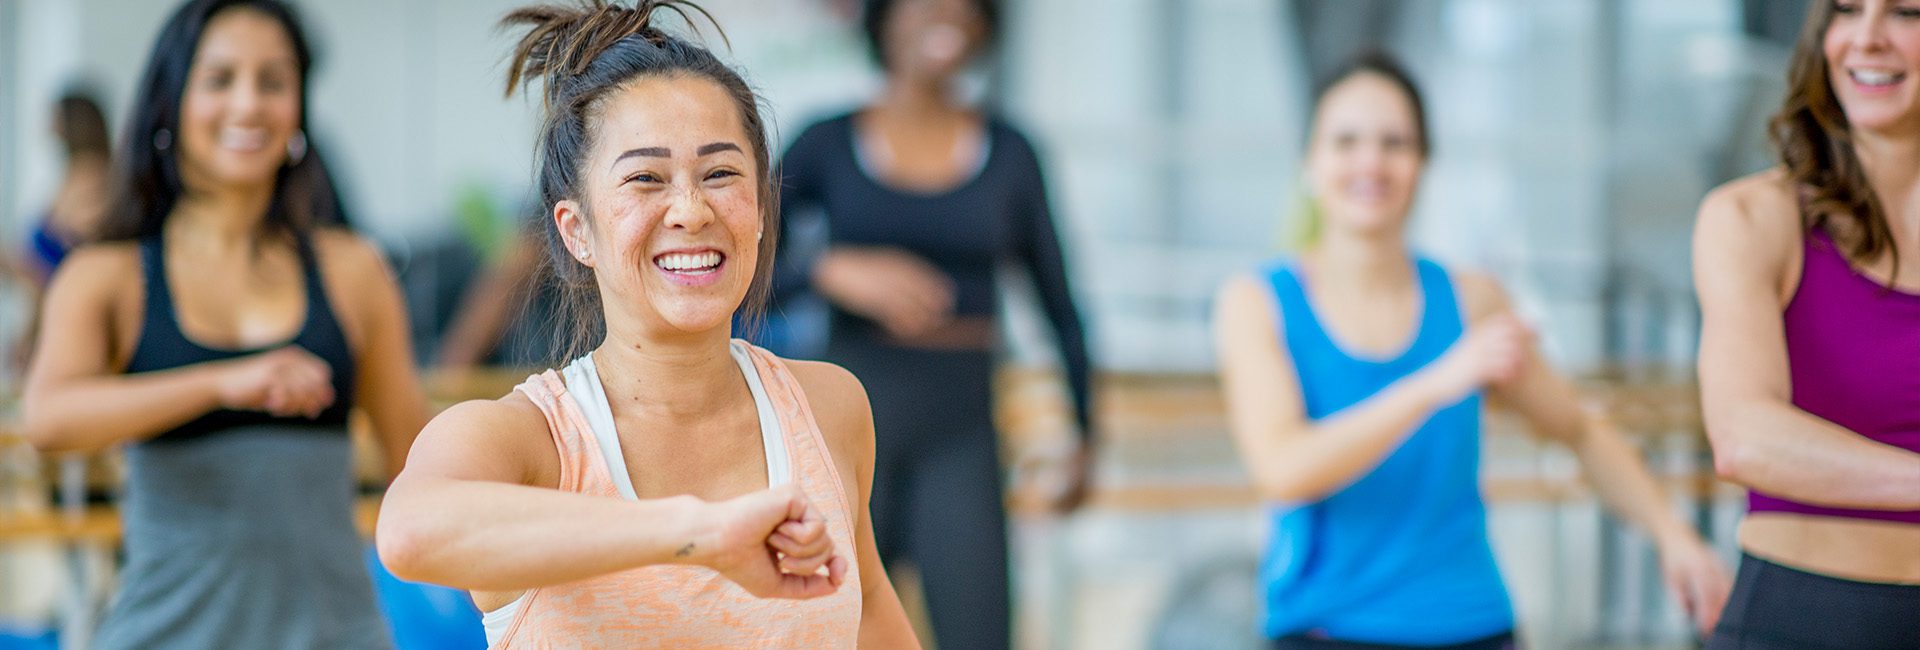 gym member smiling in a group fitness zumba class